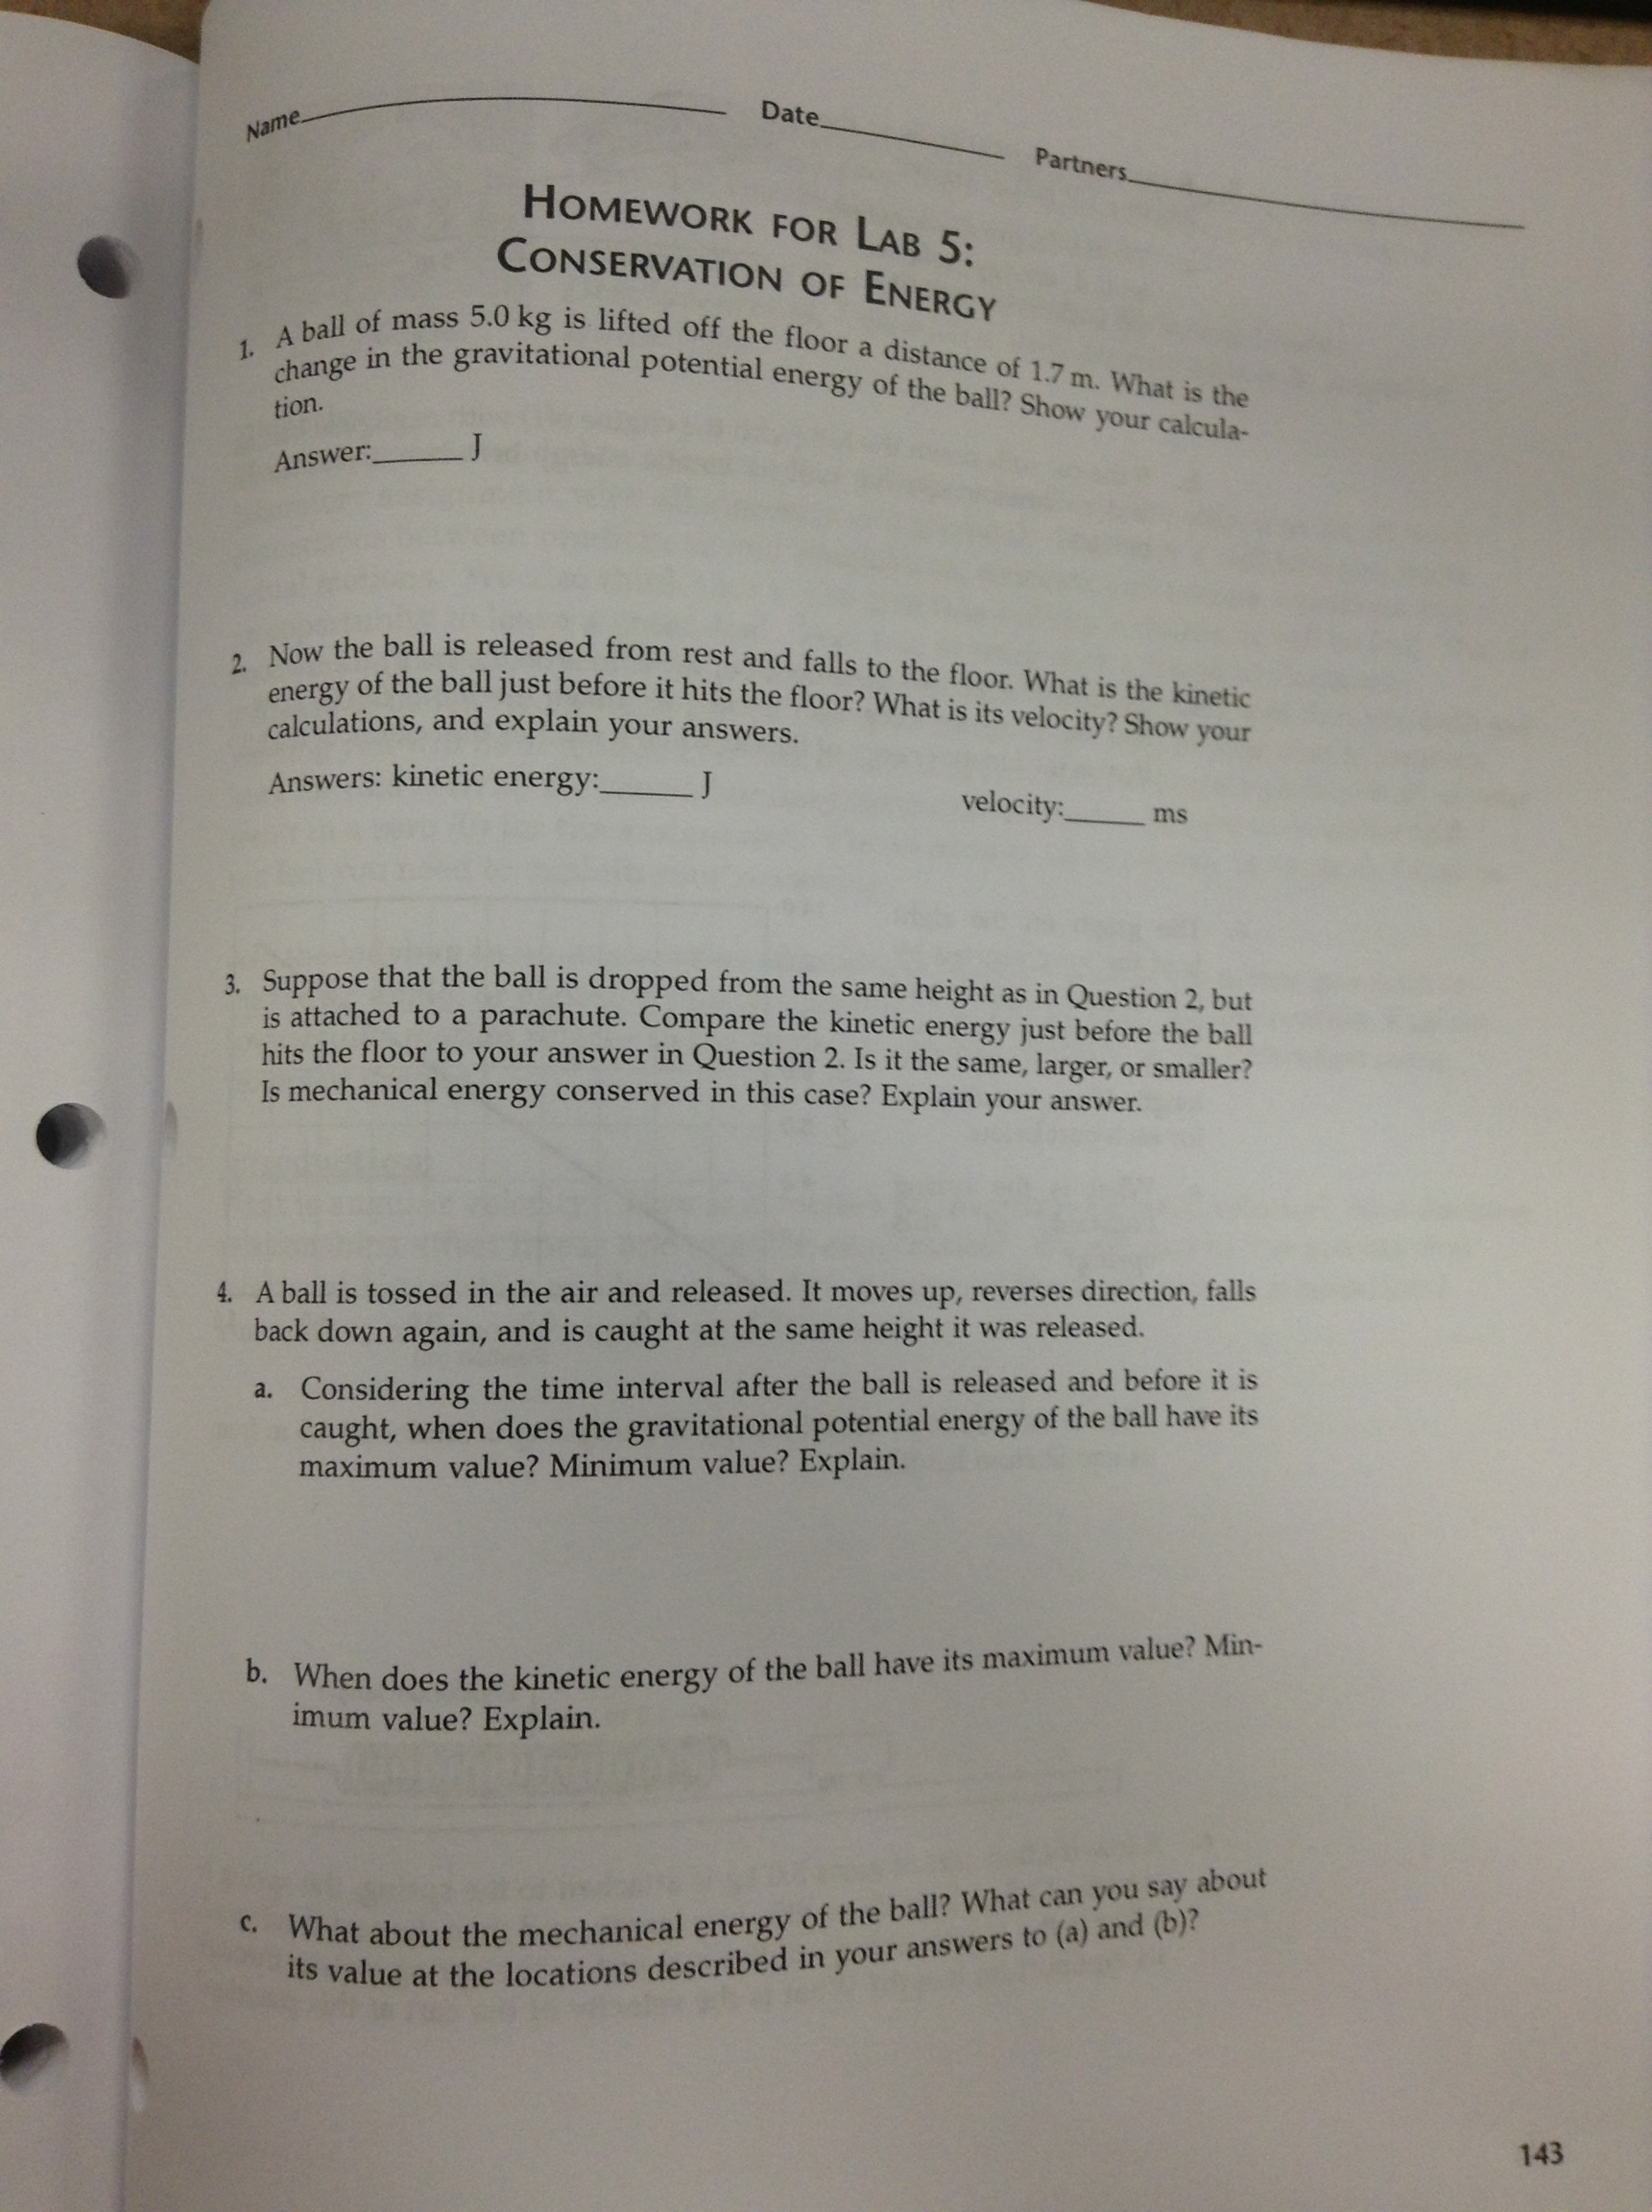 solutions to homework questions 2